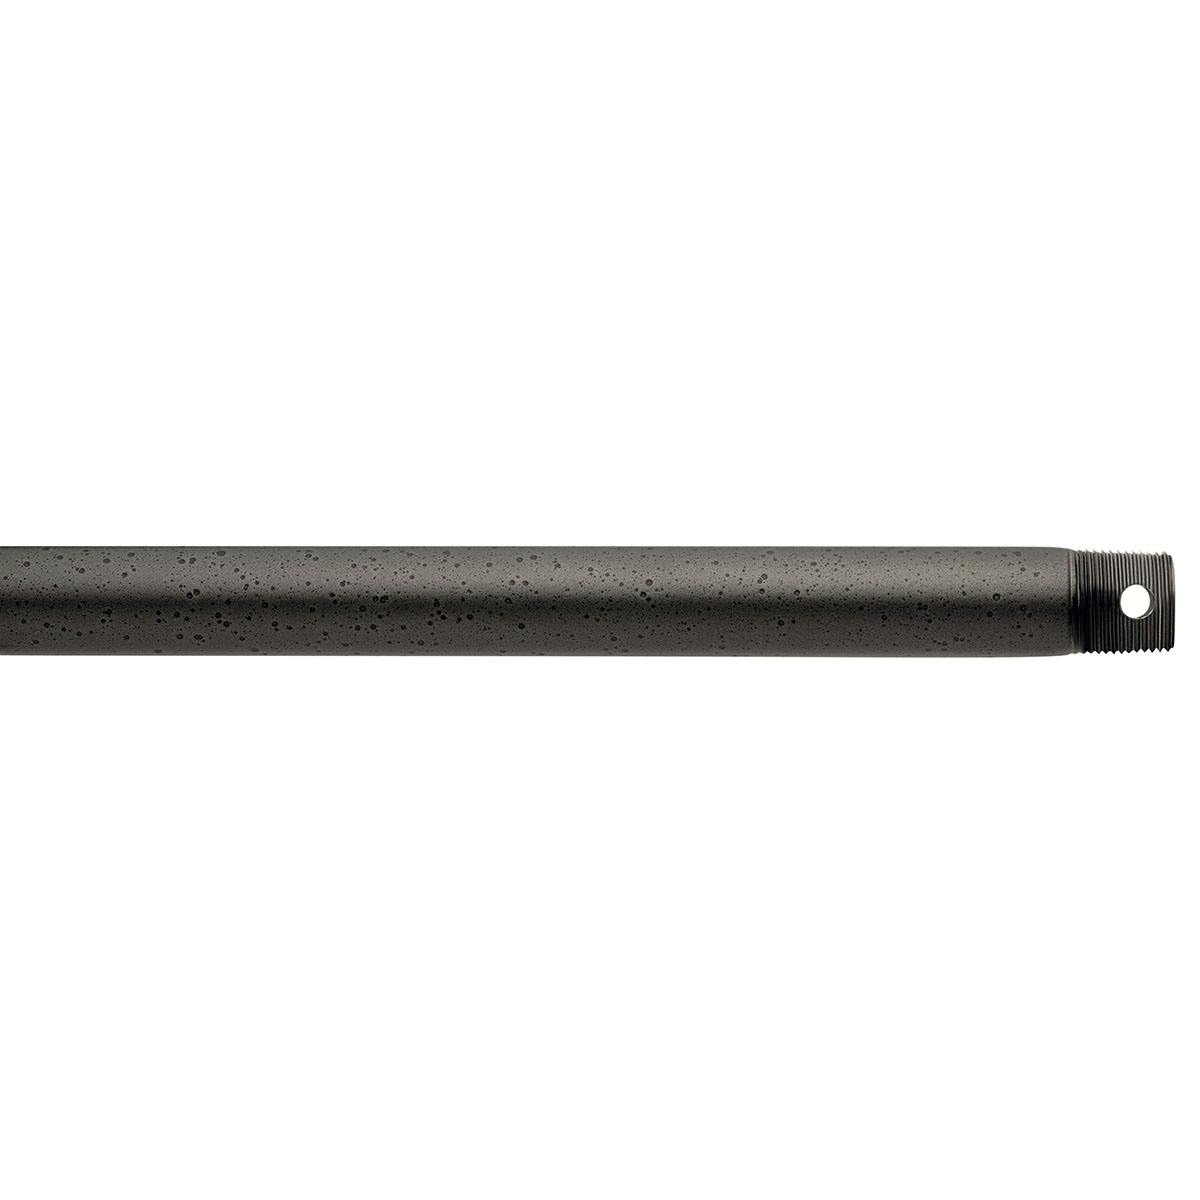 Dual Threaded 36" Downrod Anvil Iron on a white background